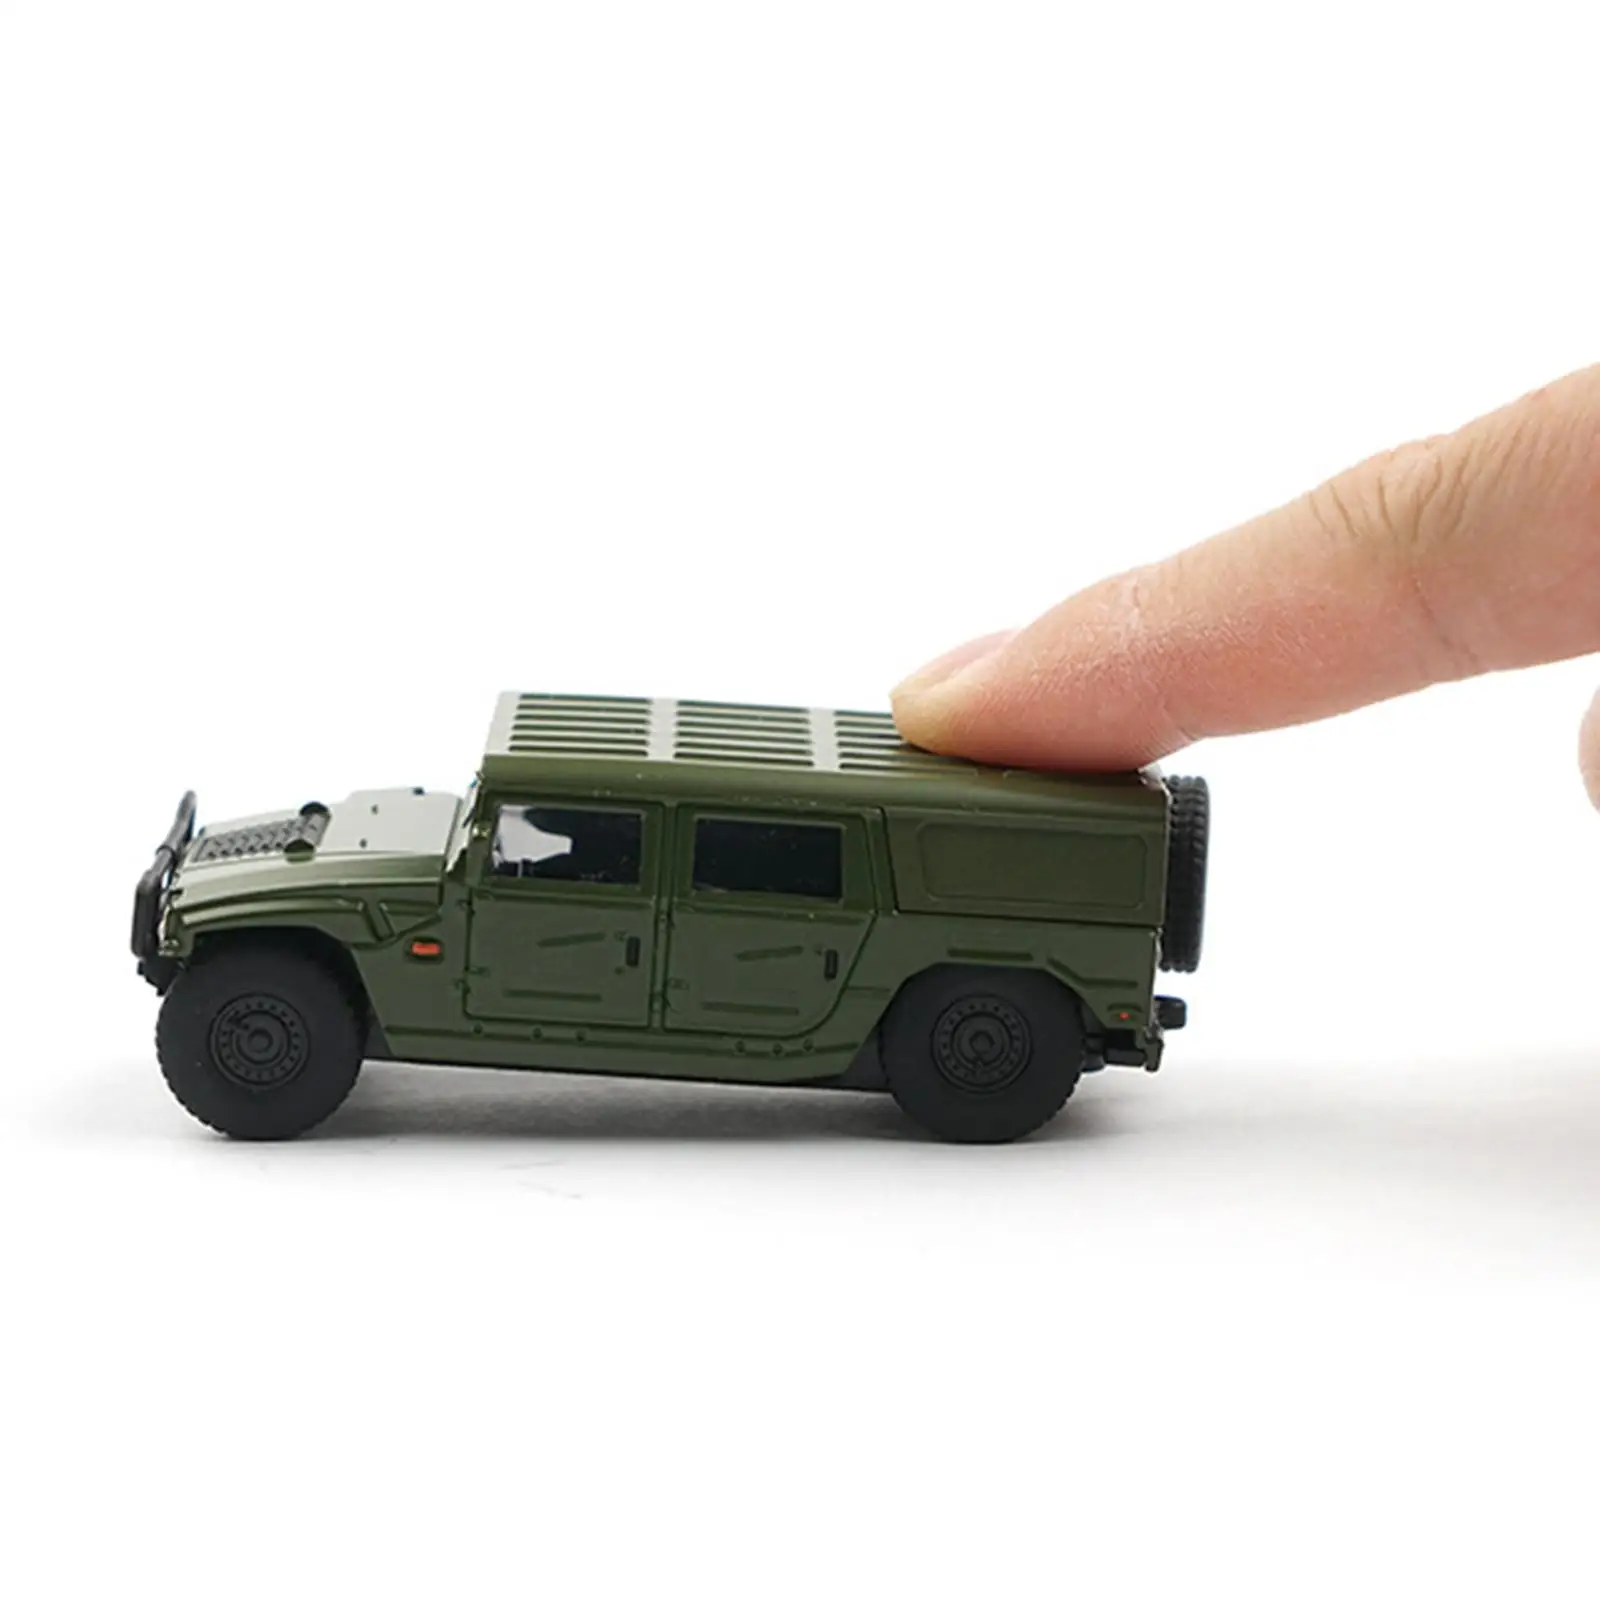 1/64 Miniature Car Toys Collectibles for Photography Props Micro Landscapes